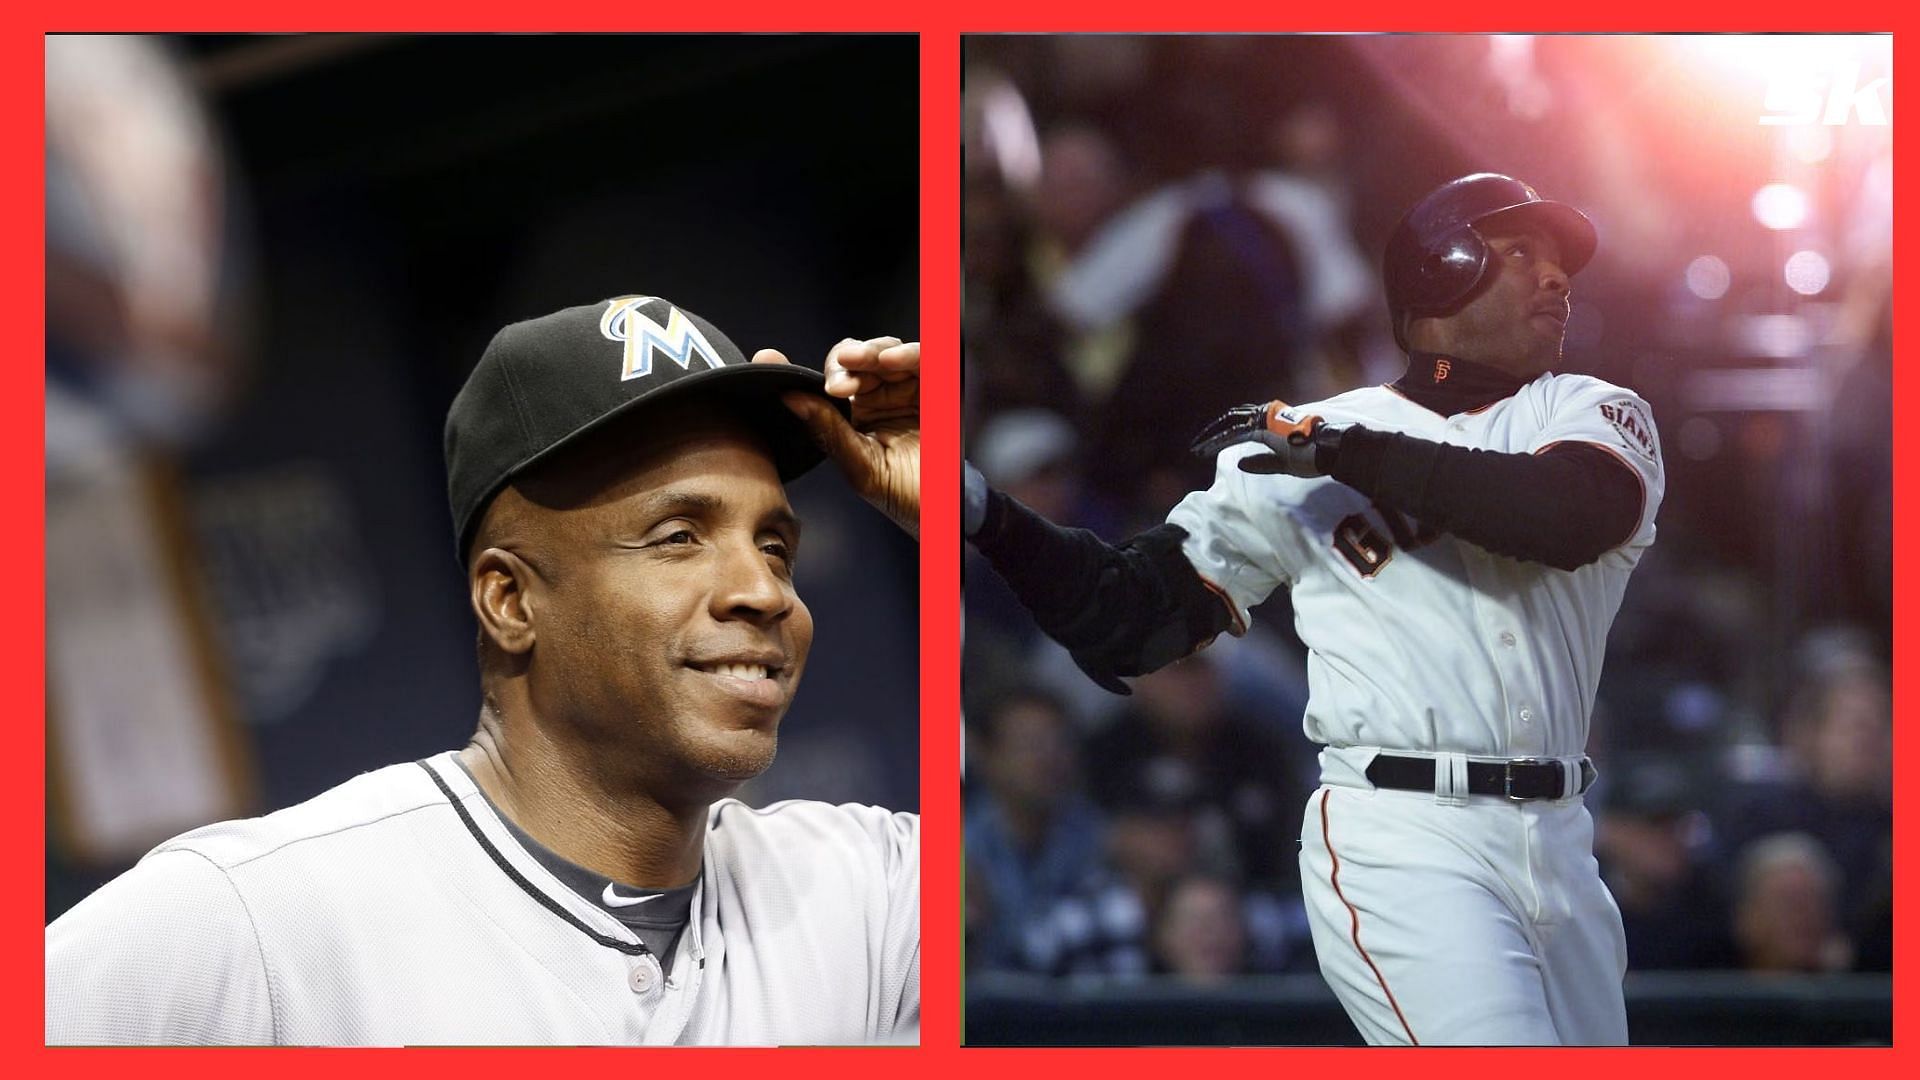 Barry Bonds reveals what bothers him most about Hall of Fame snub